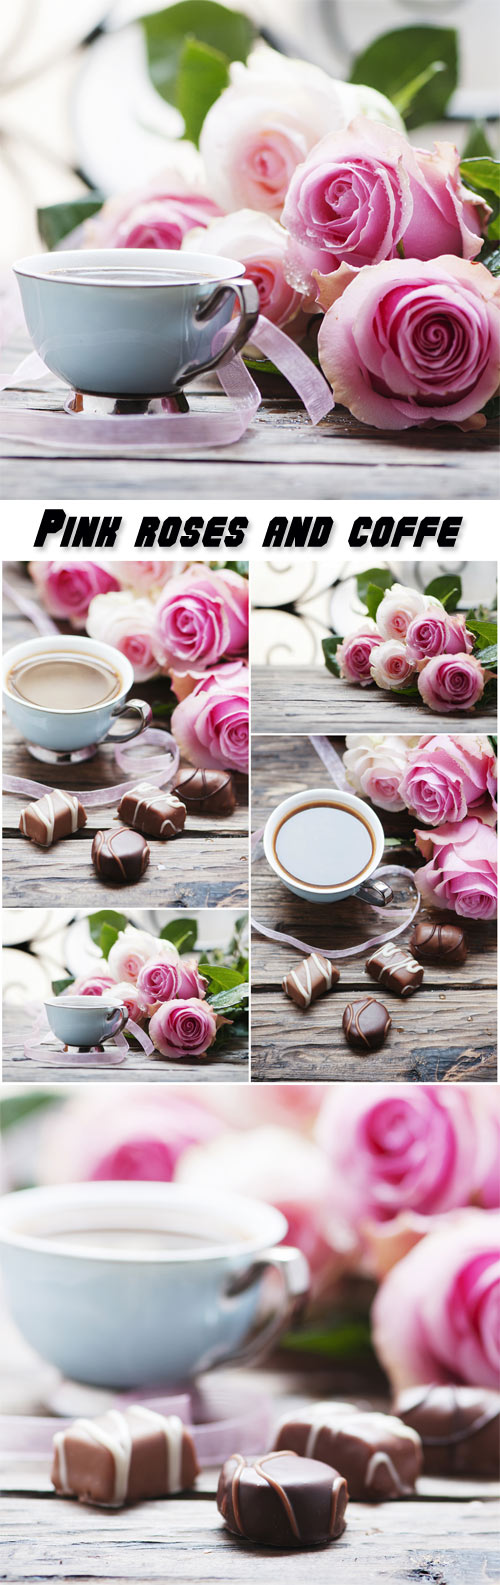 Pink roses, coffe and chocolate on the wooden table